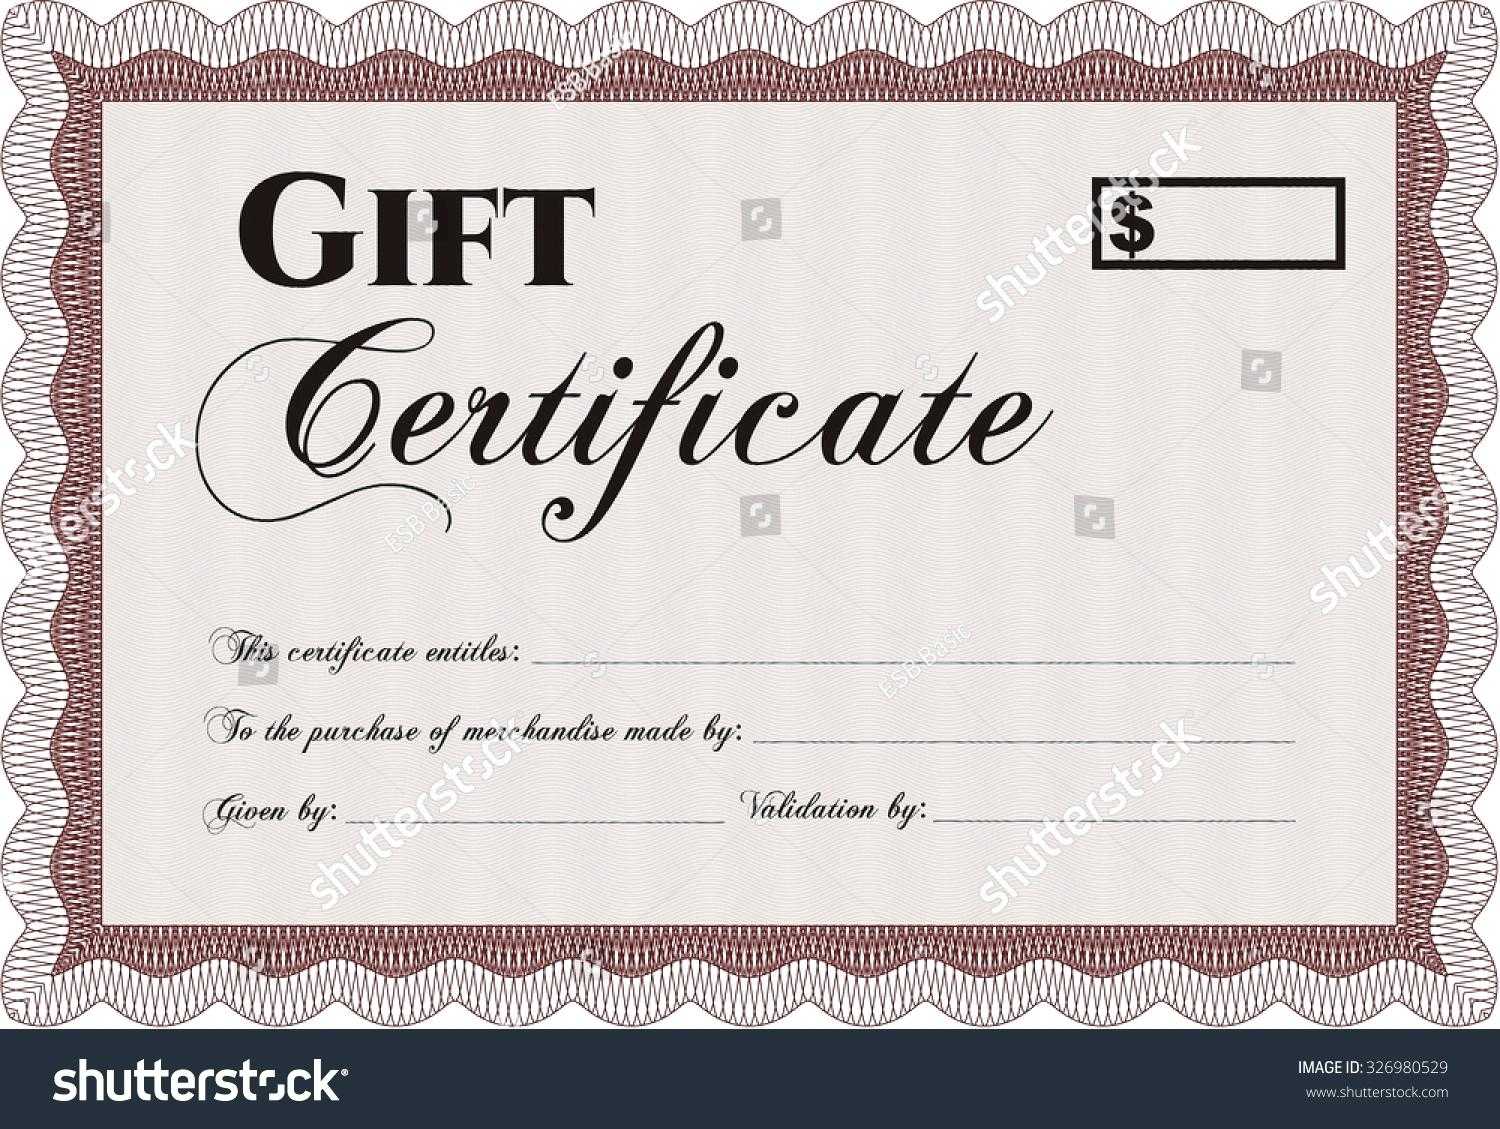 Bunch Ideas For This Certificate Entitles The Bearer For This Certificate Entitles The Bearer To Template